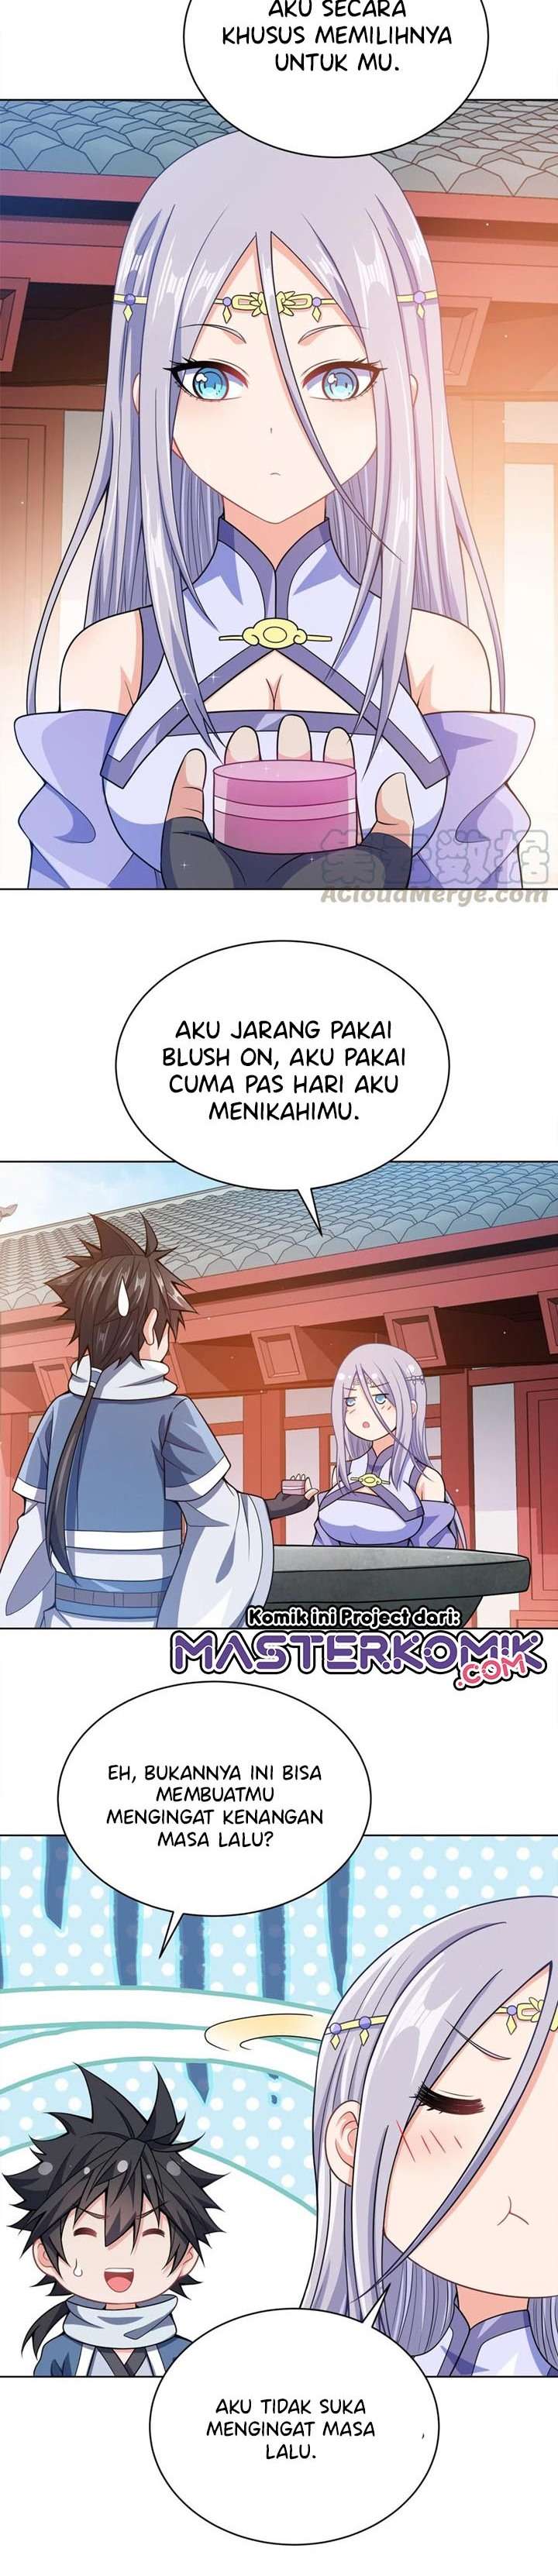 My Lady Is Actually the Empress? Chapter 34 Bahasa Indonesia